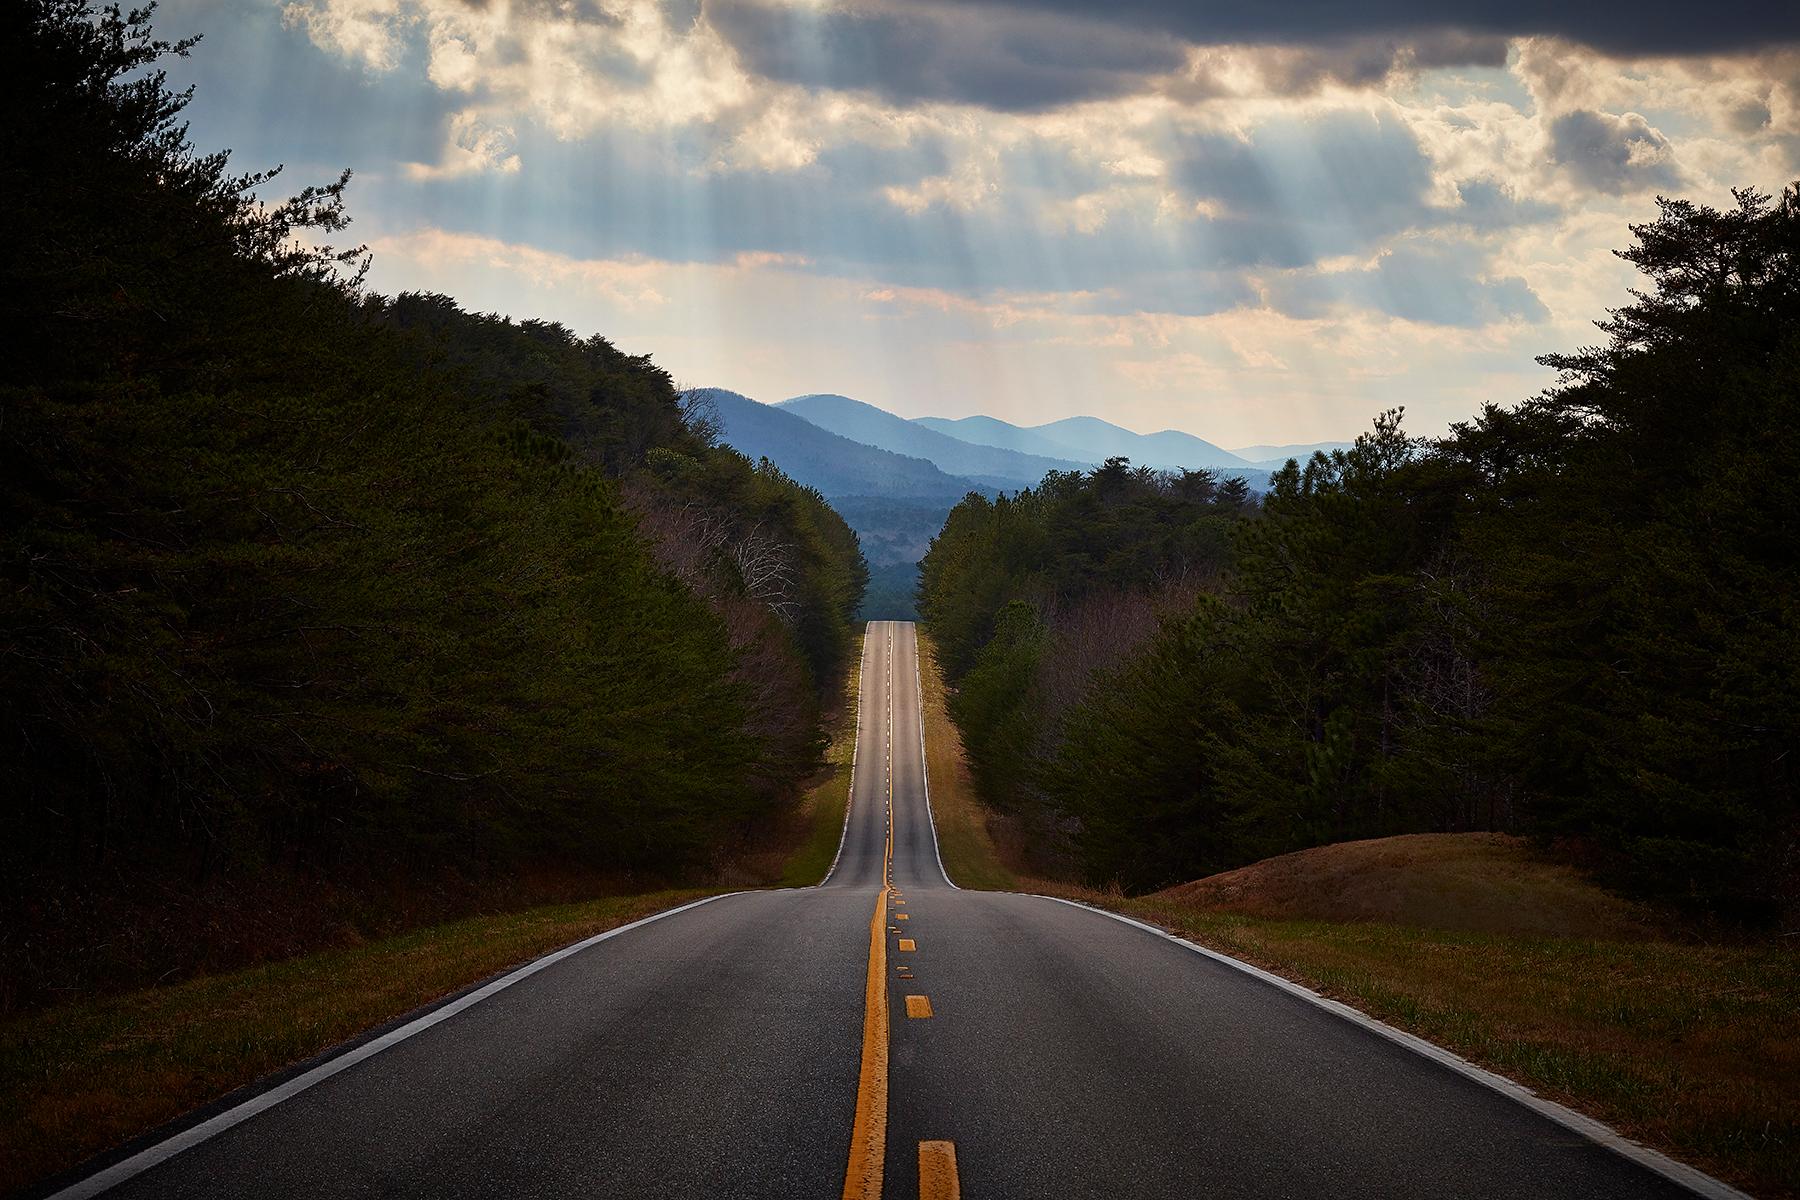 Peter Andrew Lusztyk - Alabama Highway, Photography 2021, Printed After